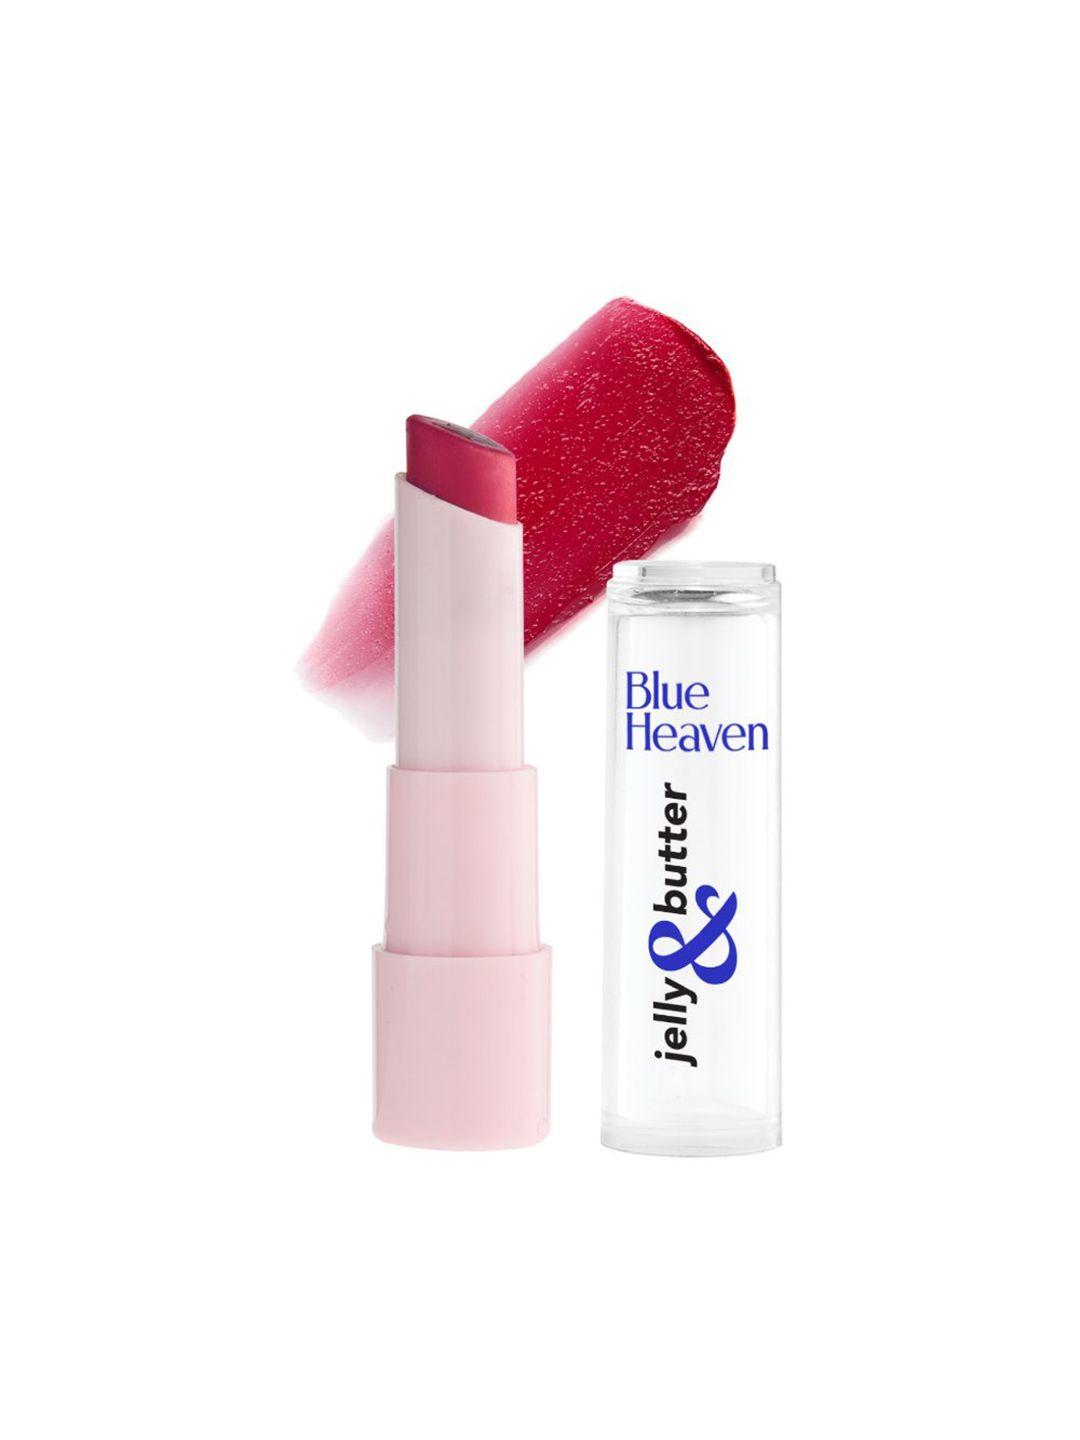 blue-heaven-jelly-&-butter-hydrating-lip-balm-with-shea-butter-&-vitamin-e---pink-rose-3-g